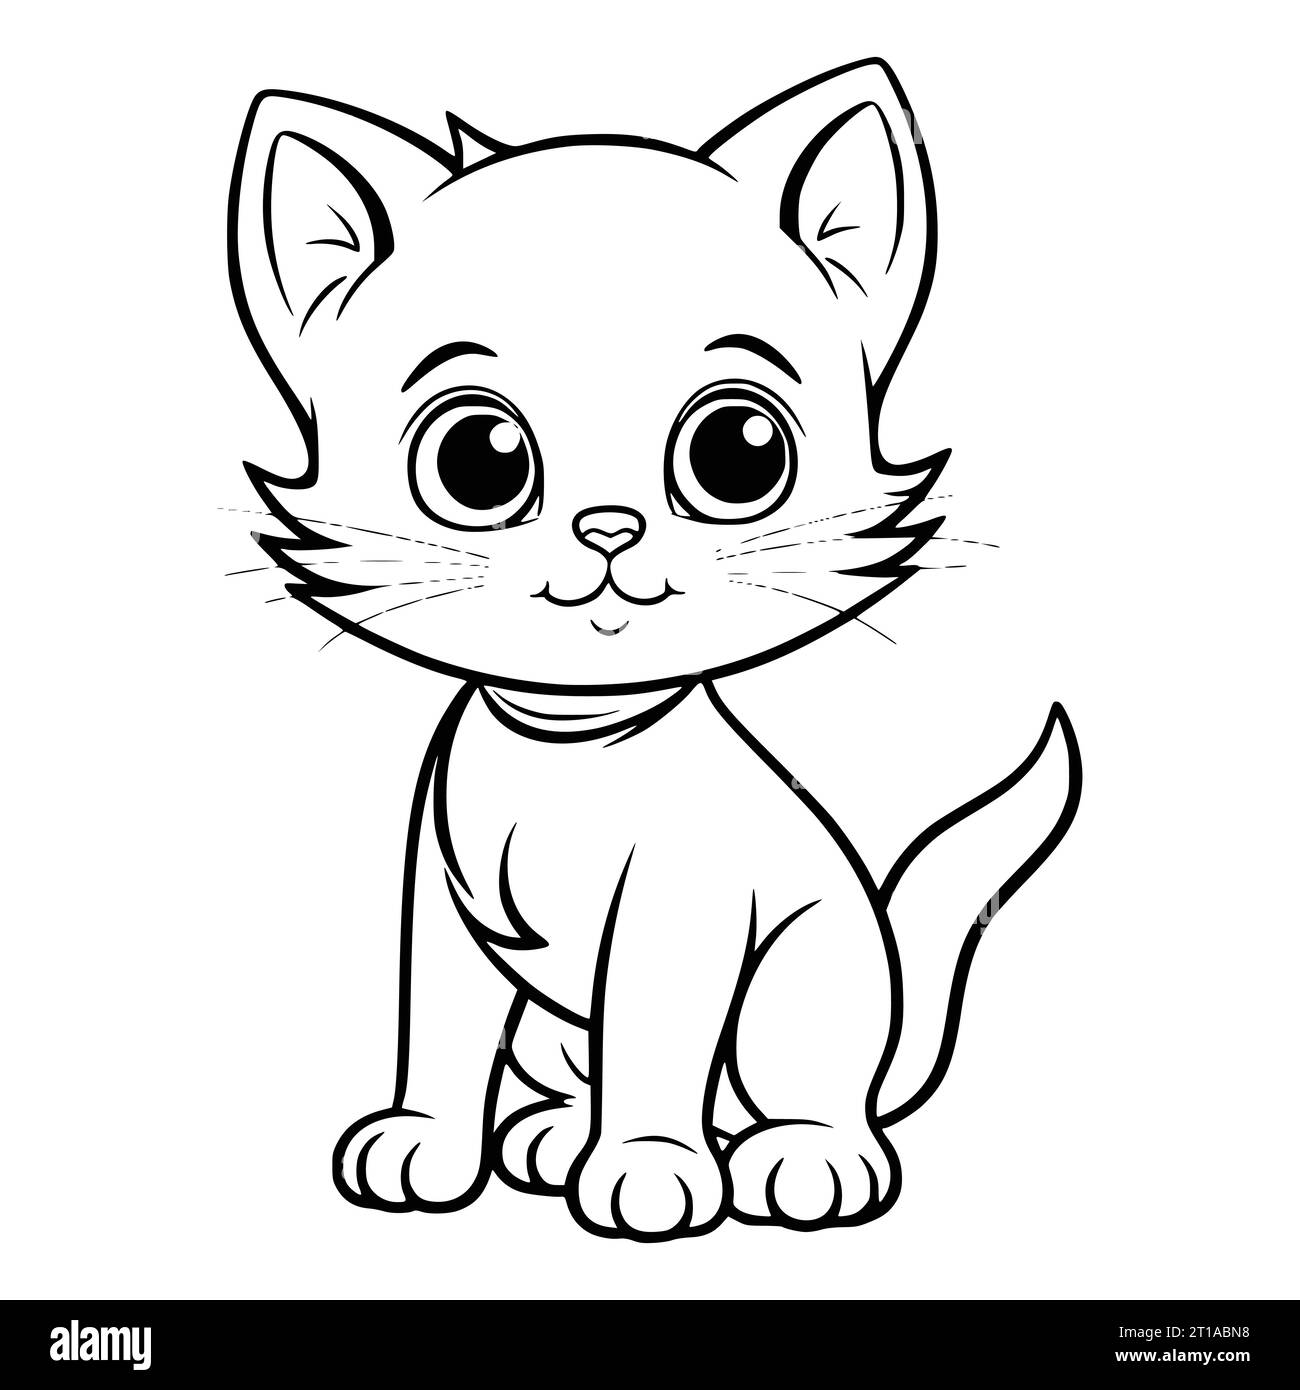 Cat Standing Coloring Page Drawing For Kids Stock Vector